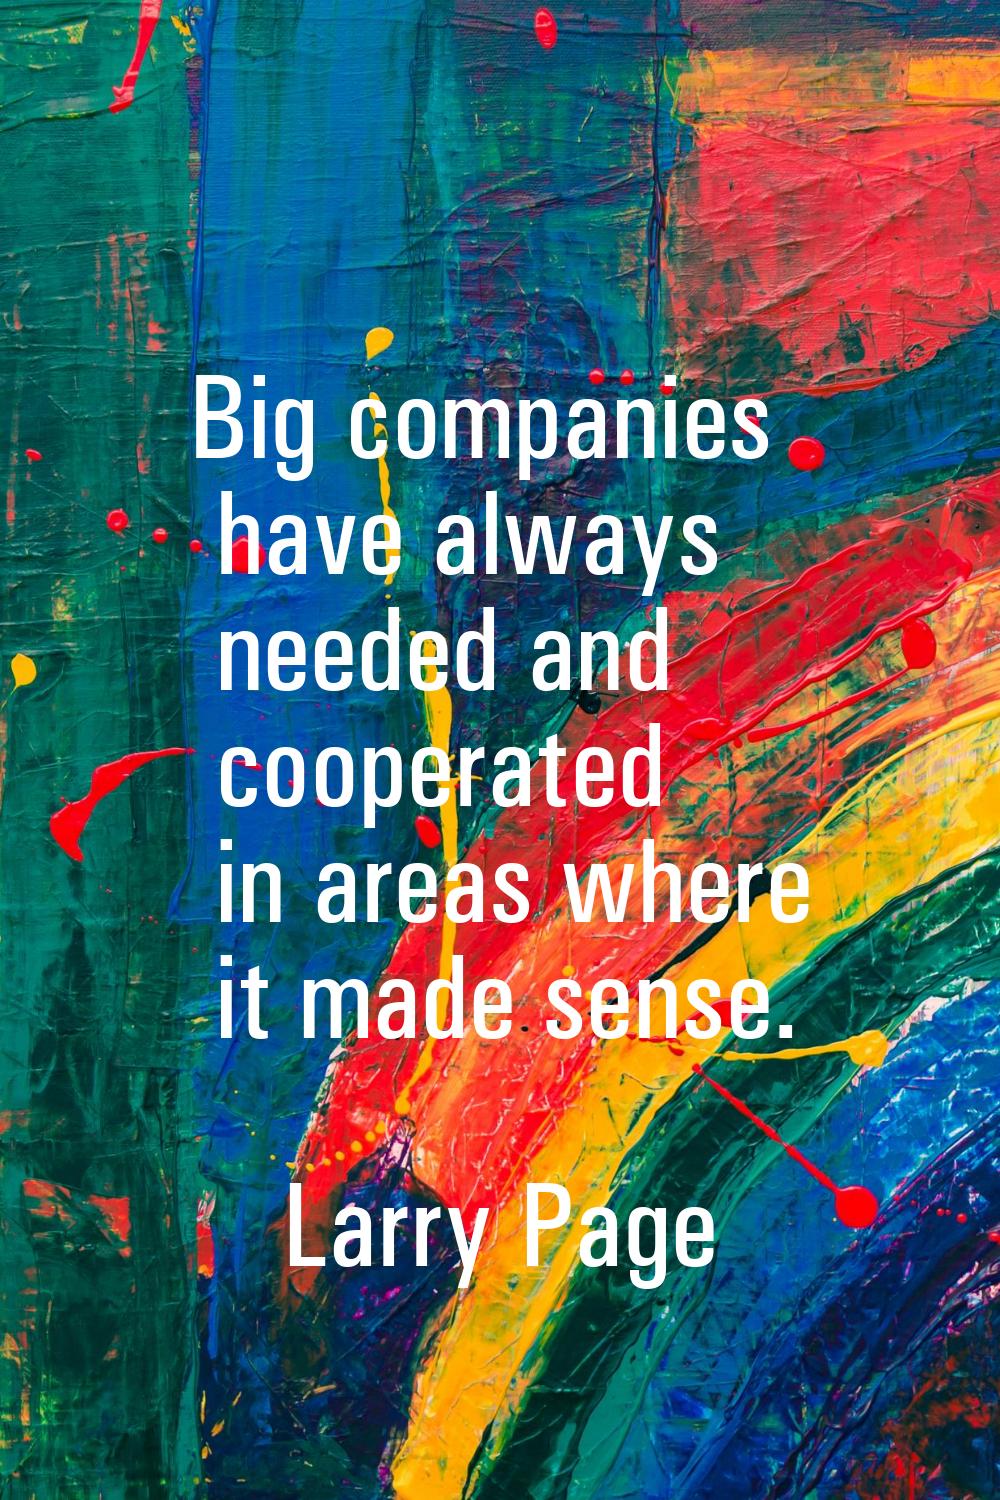 Big companies have always needed and cooperated in areas where it made sense.